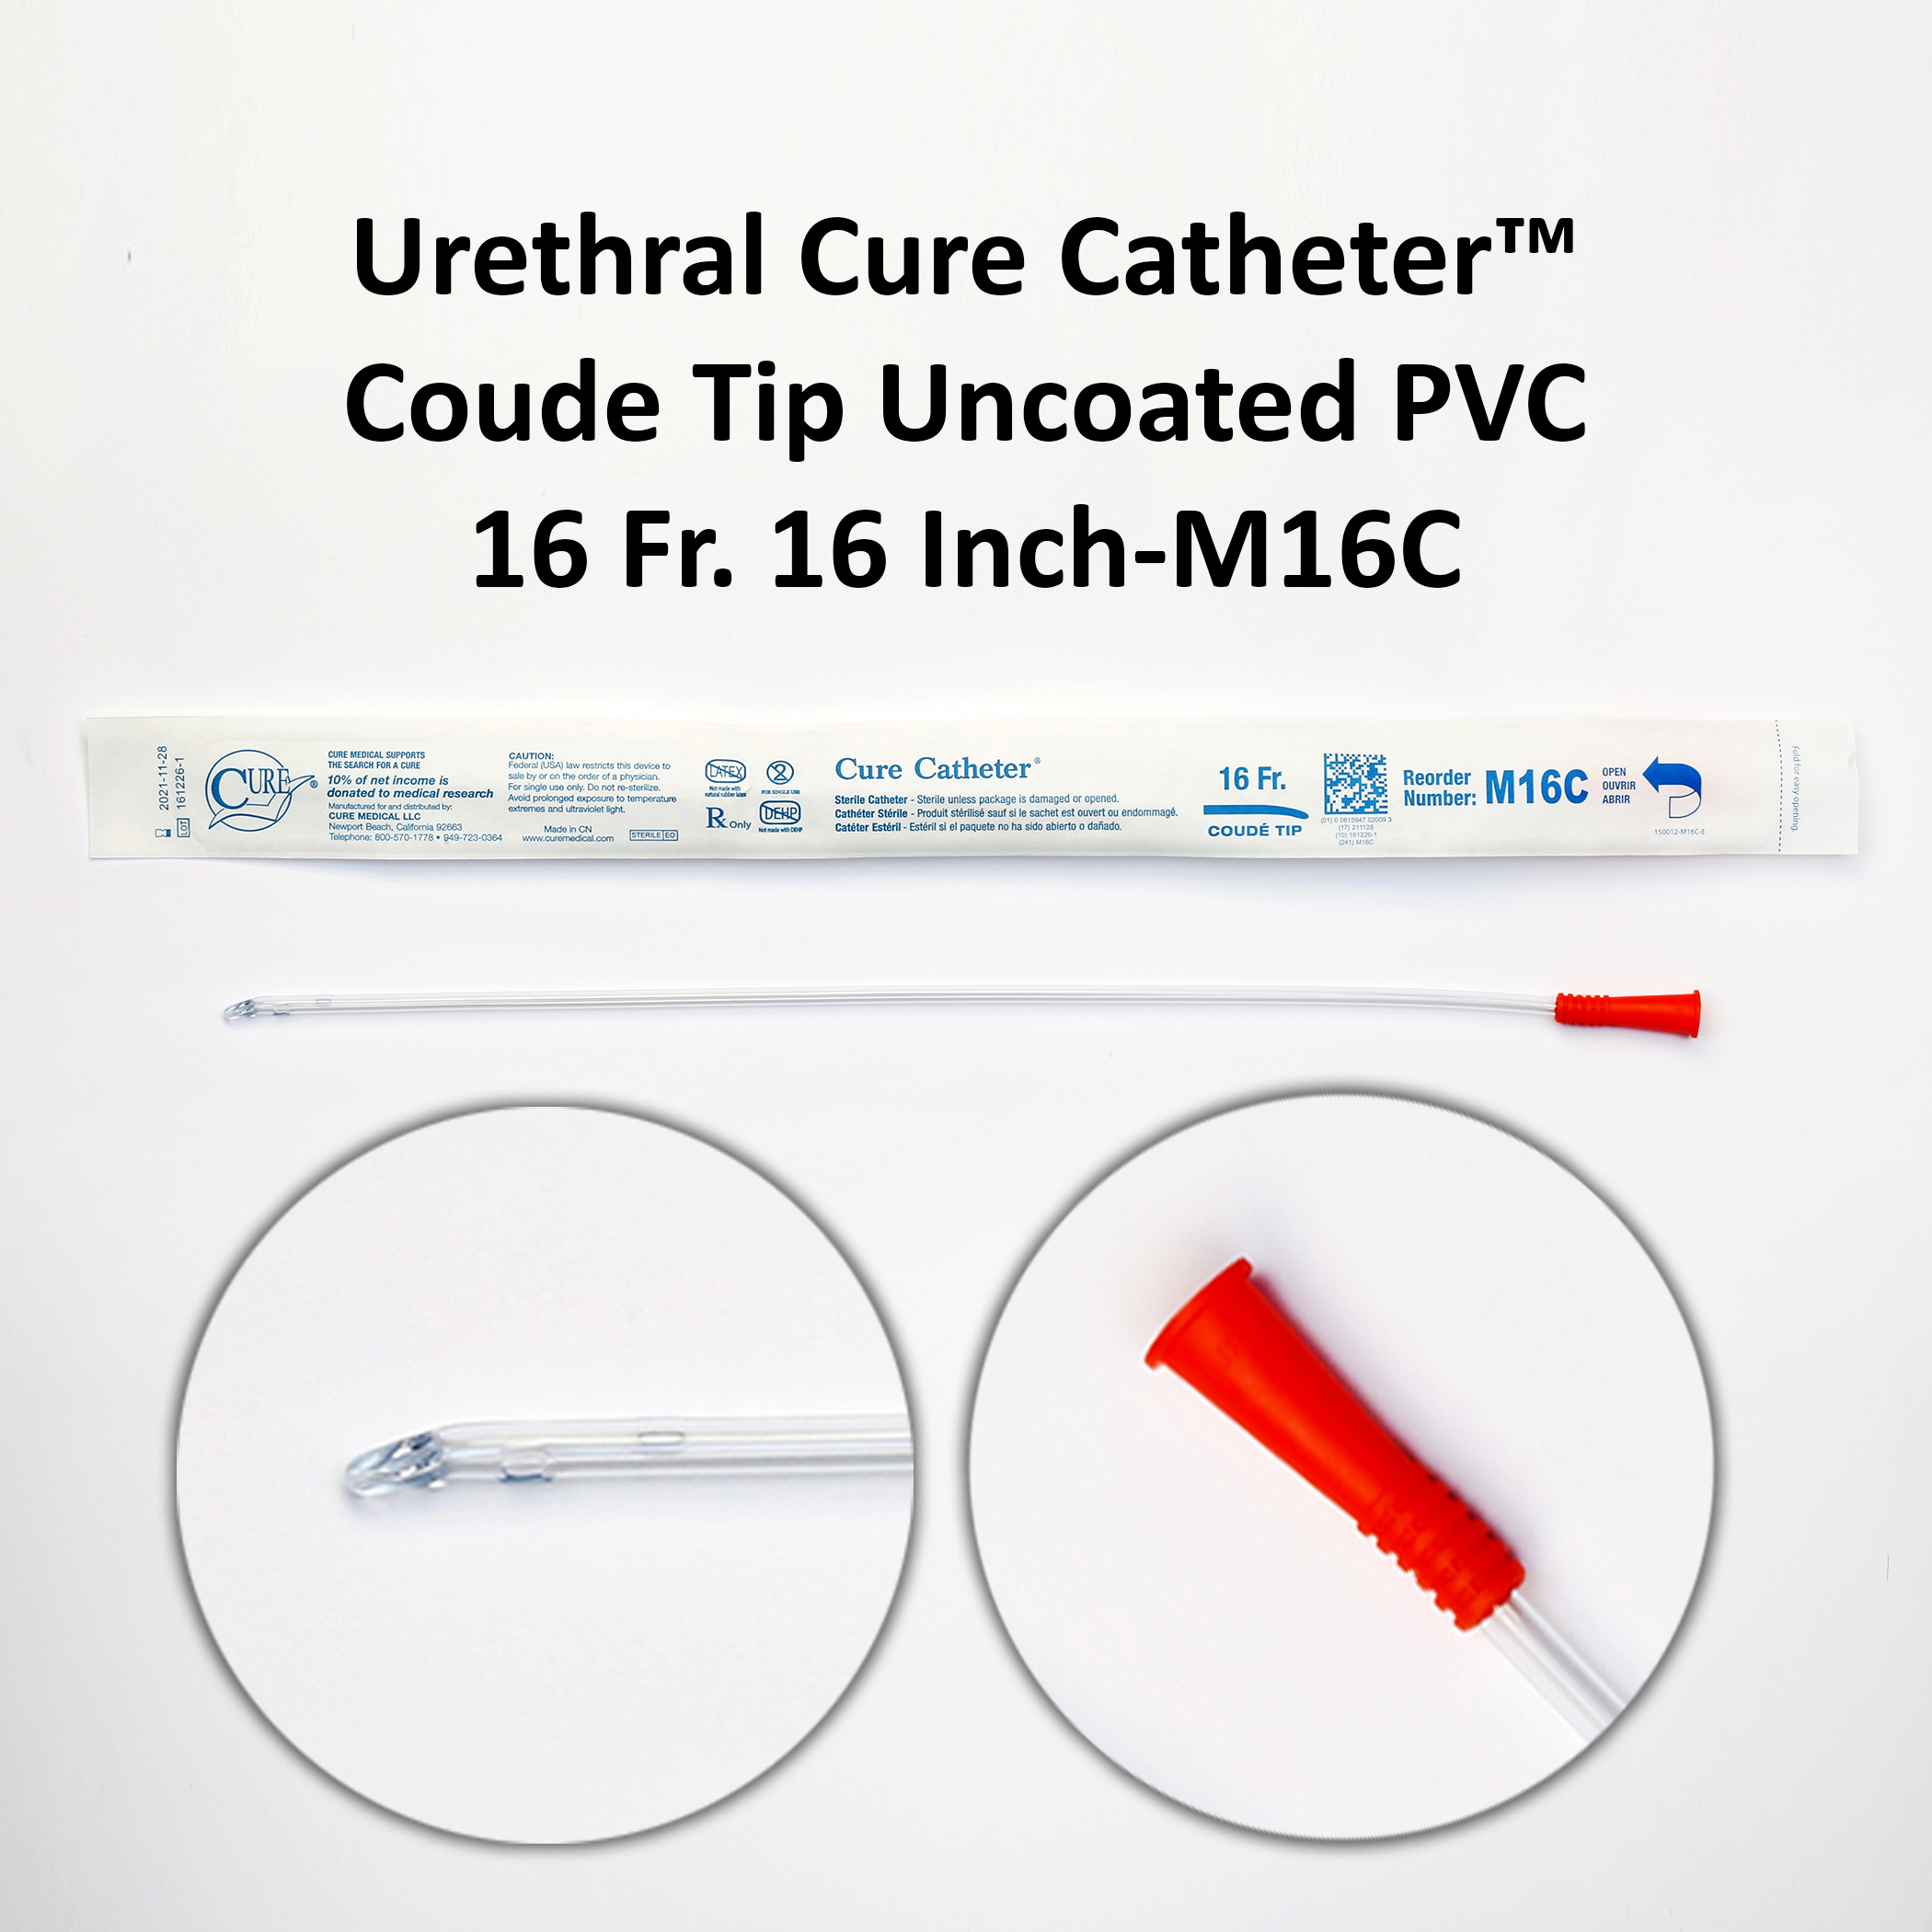 Urethral Cure Catheter Coude Tip